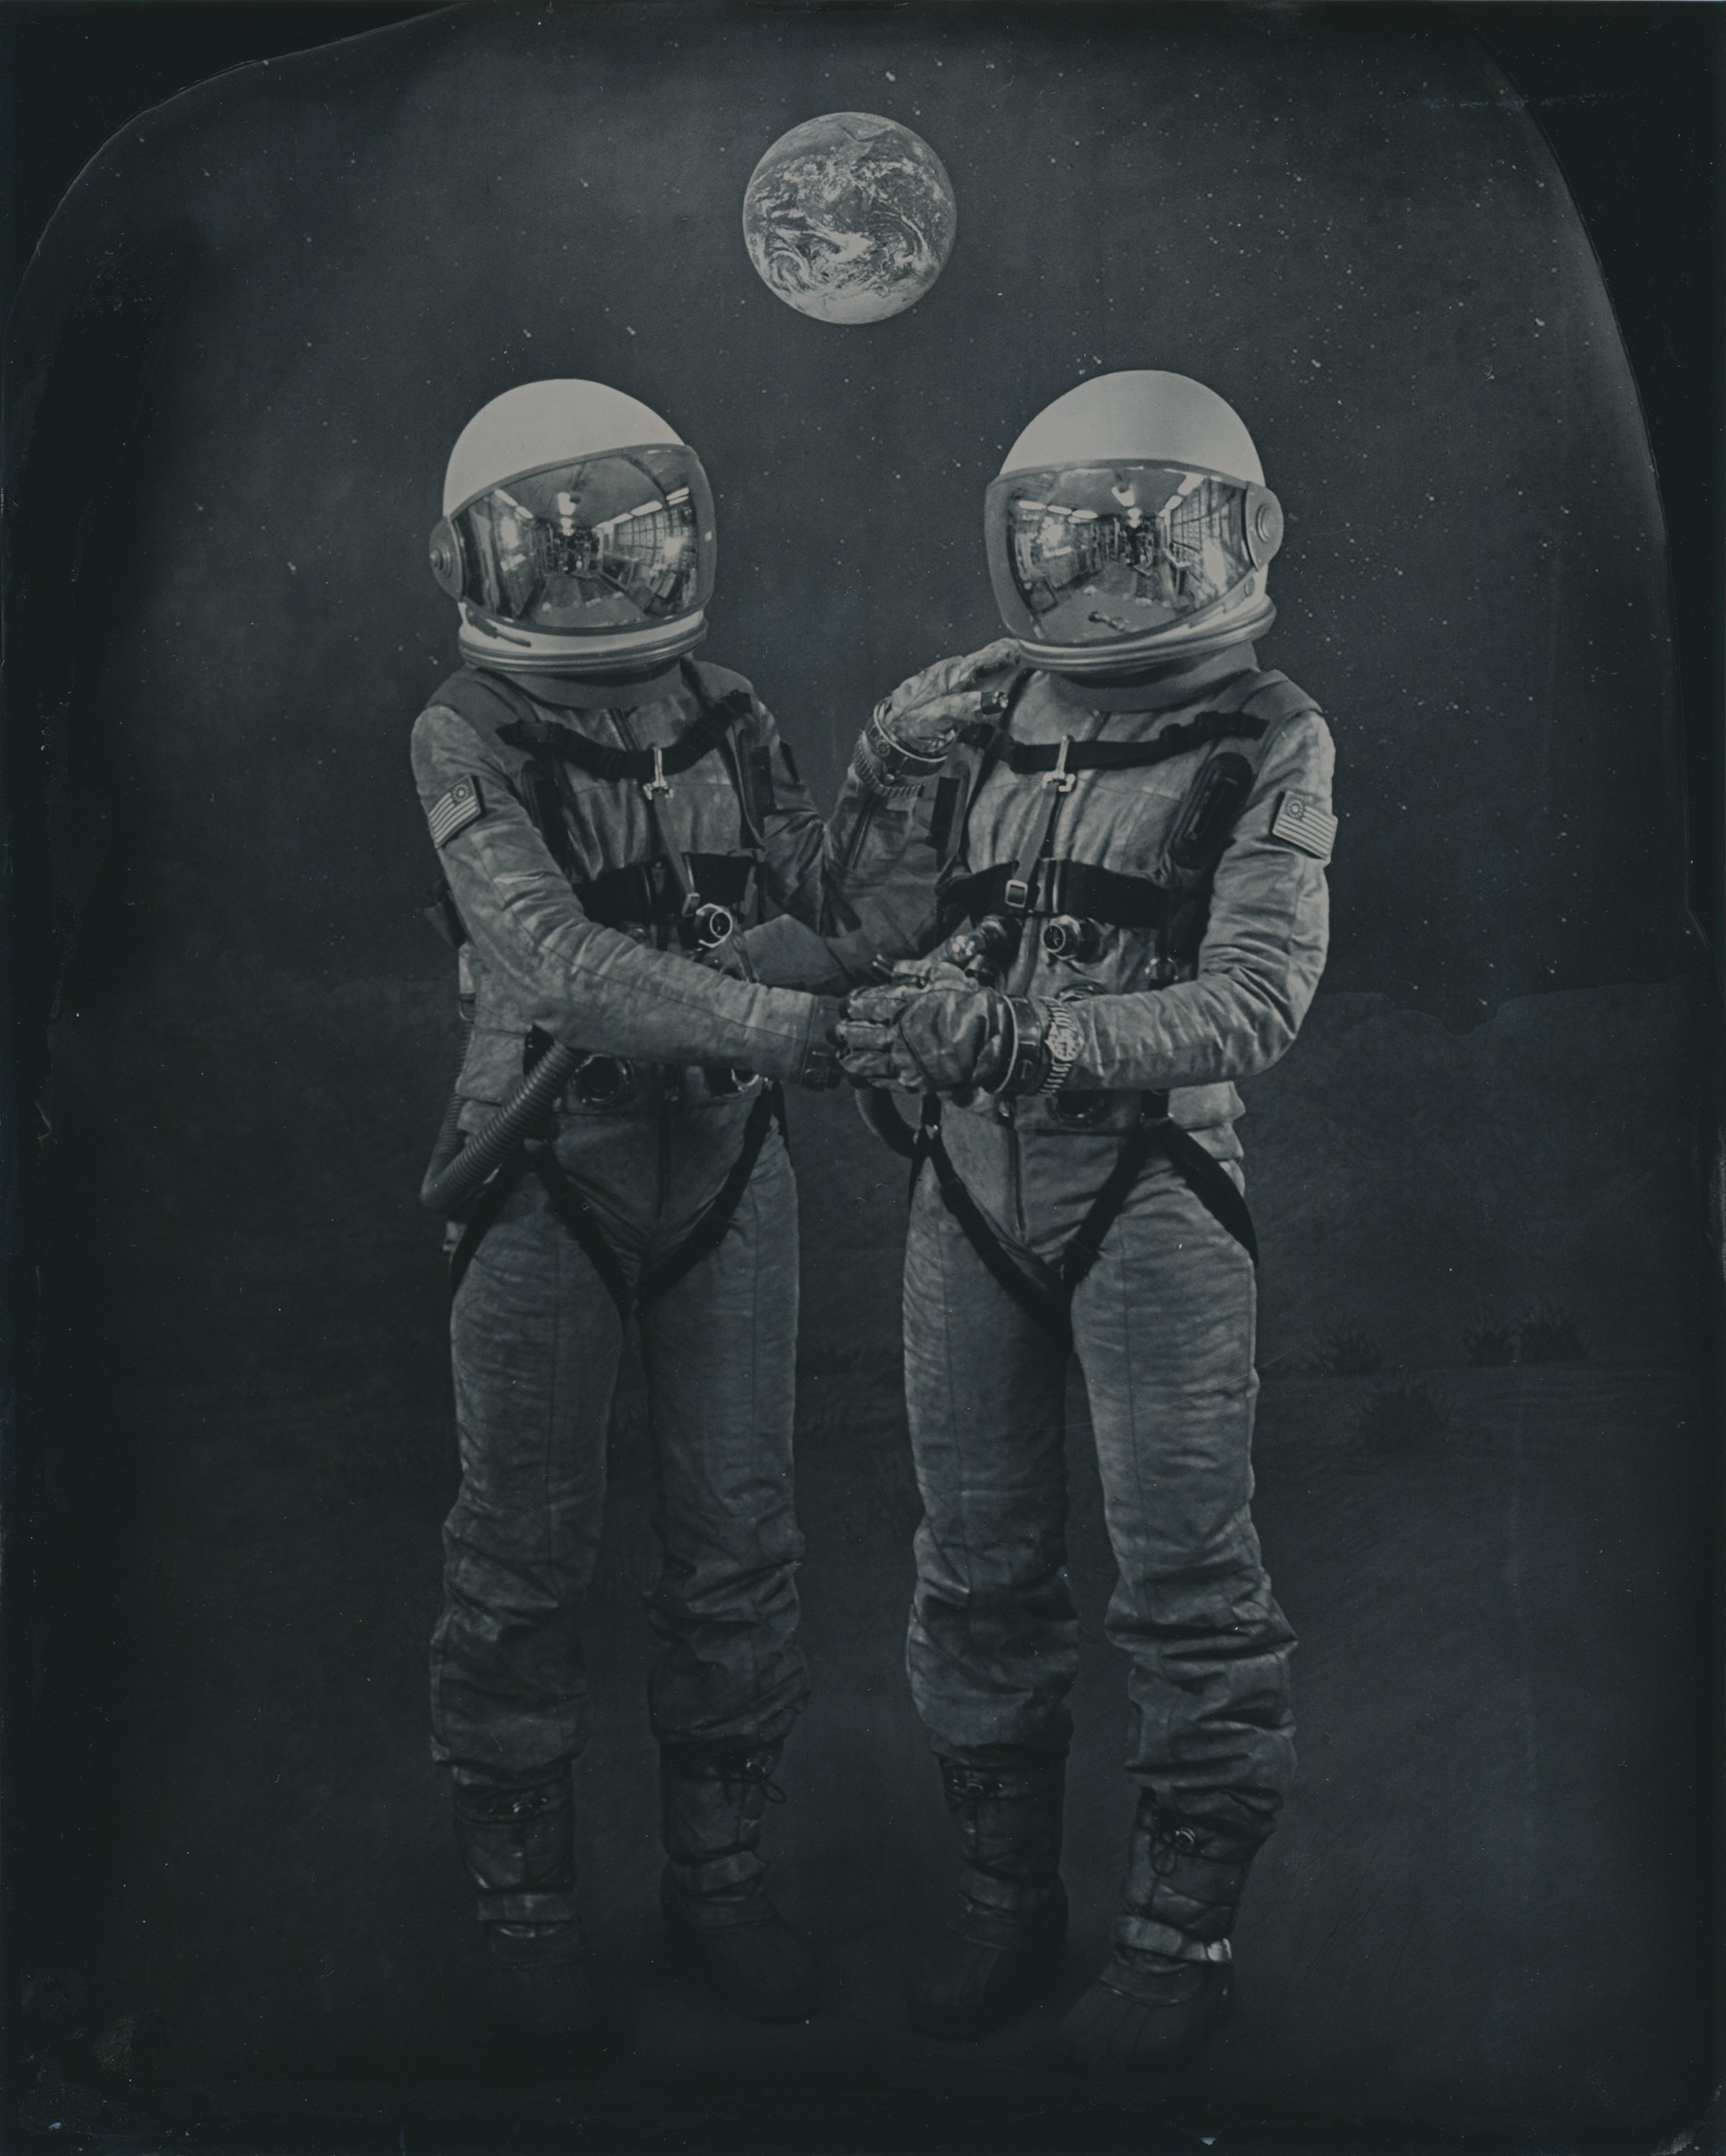   “The Twins”   2022  Wet Plate Collodion  8x10 